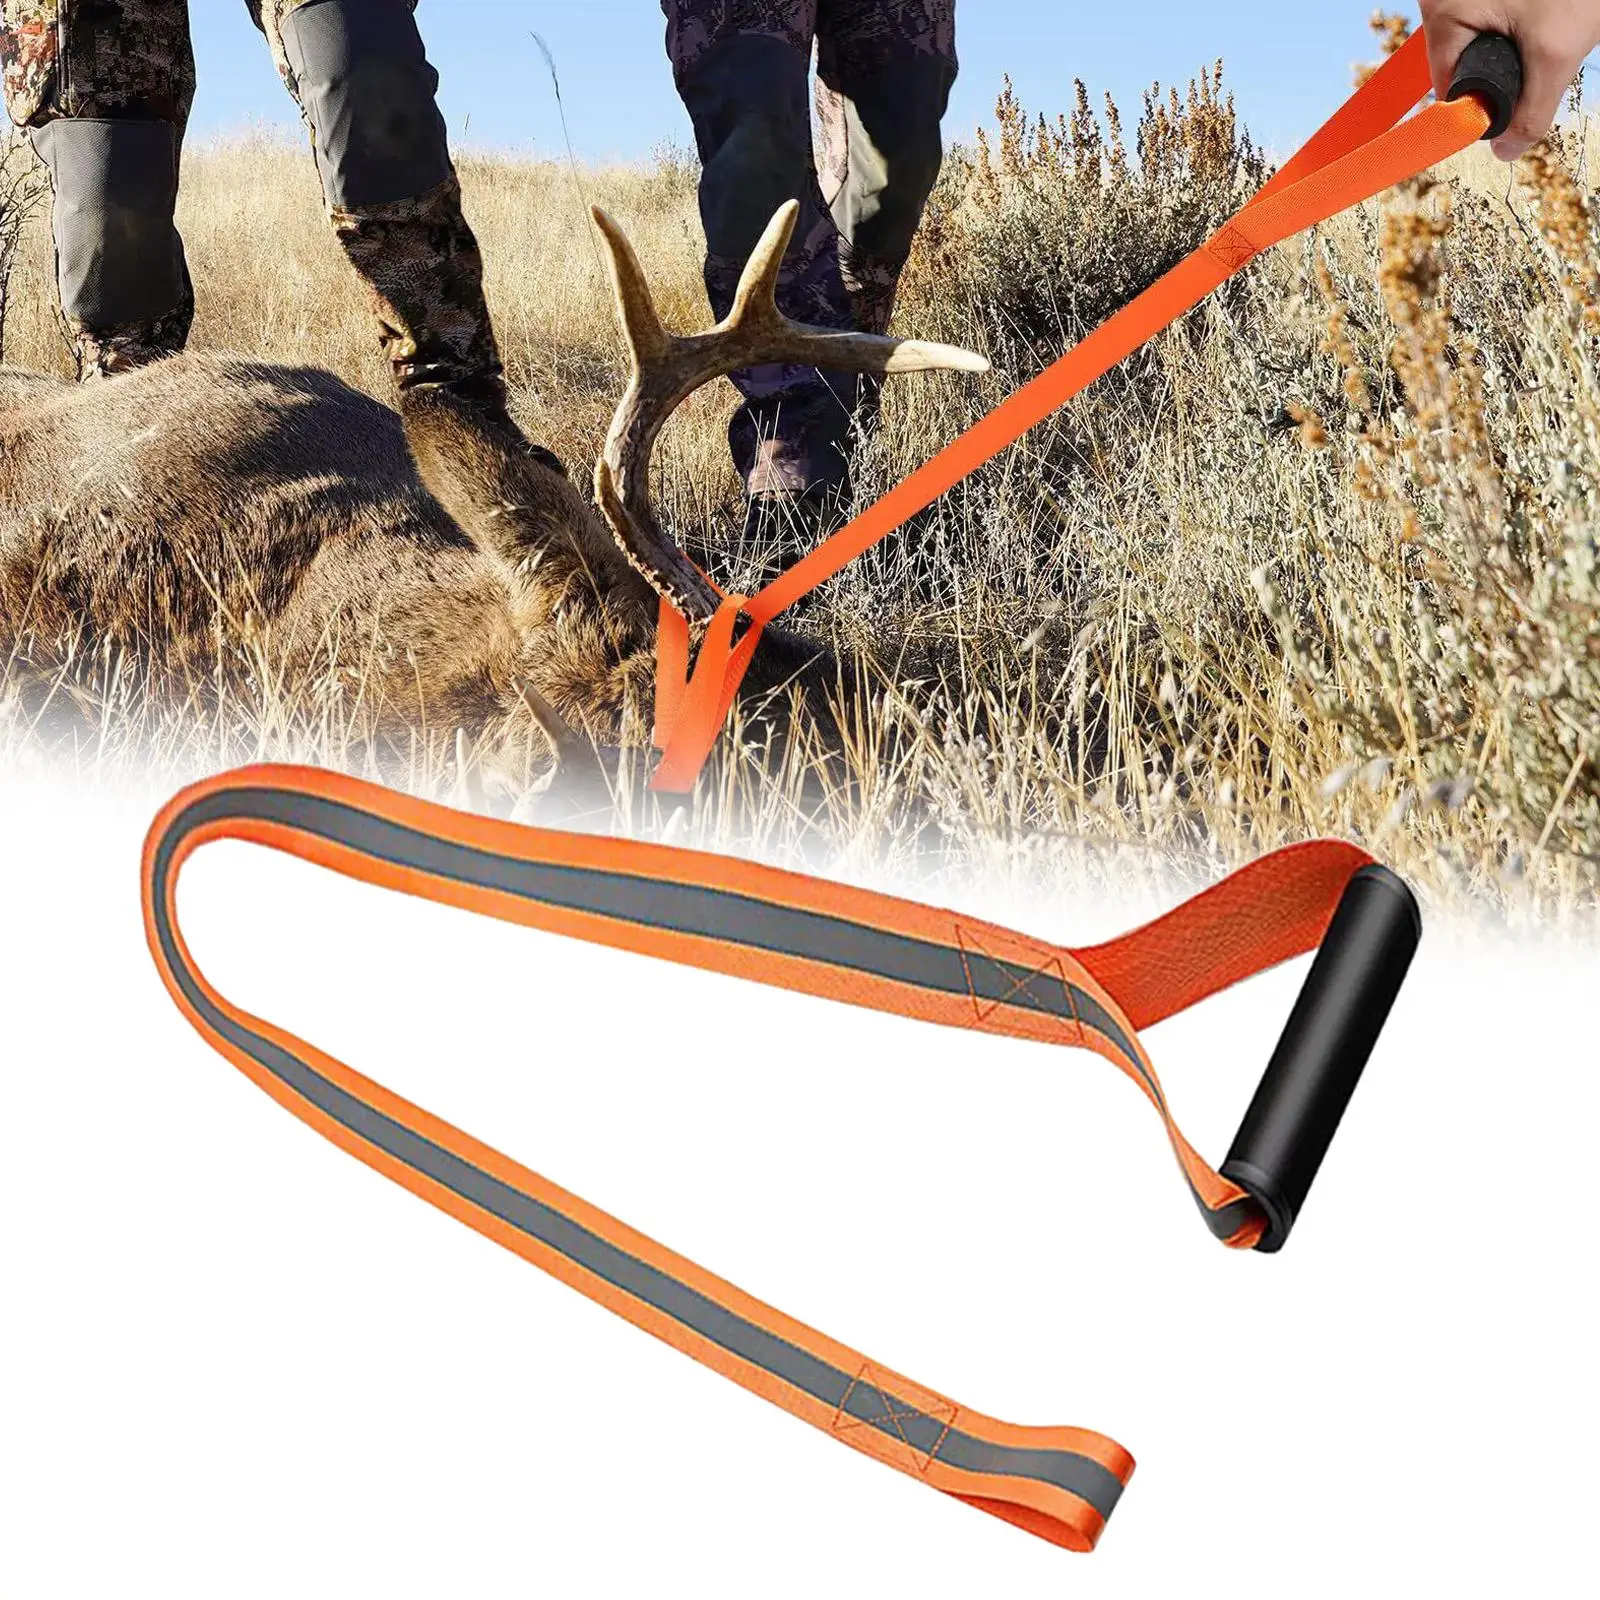 

Deer Drag with Comfortable Handle Multipurpose Durable Portable Dragging Rope for Outdoor Supplies Farm Binding Lifting Objects